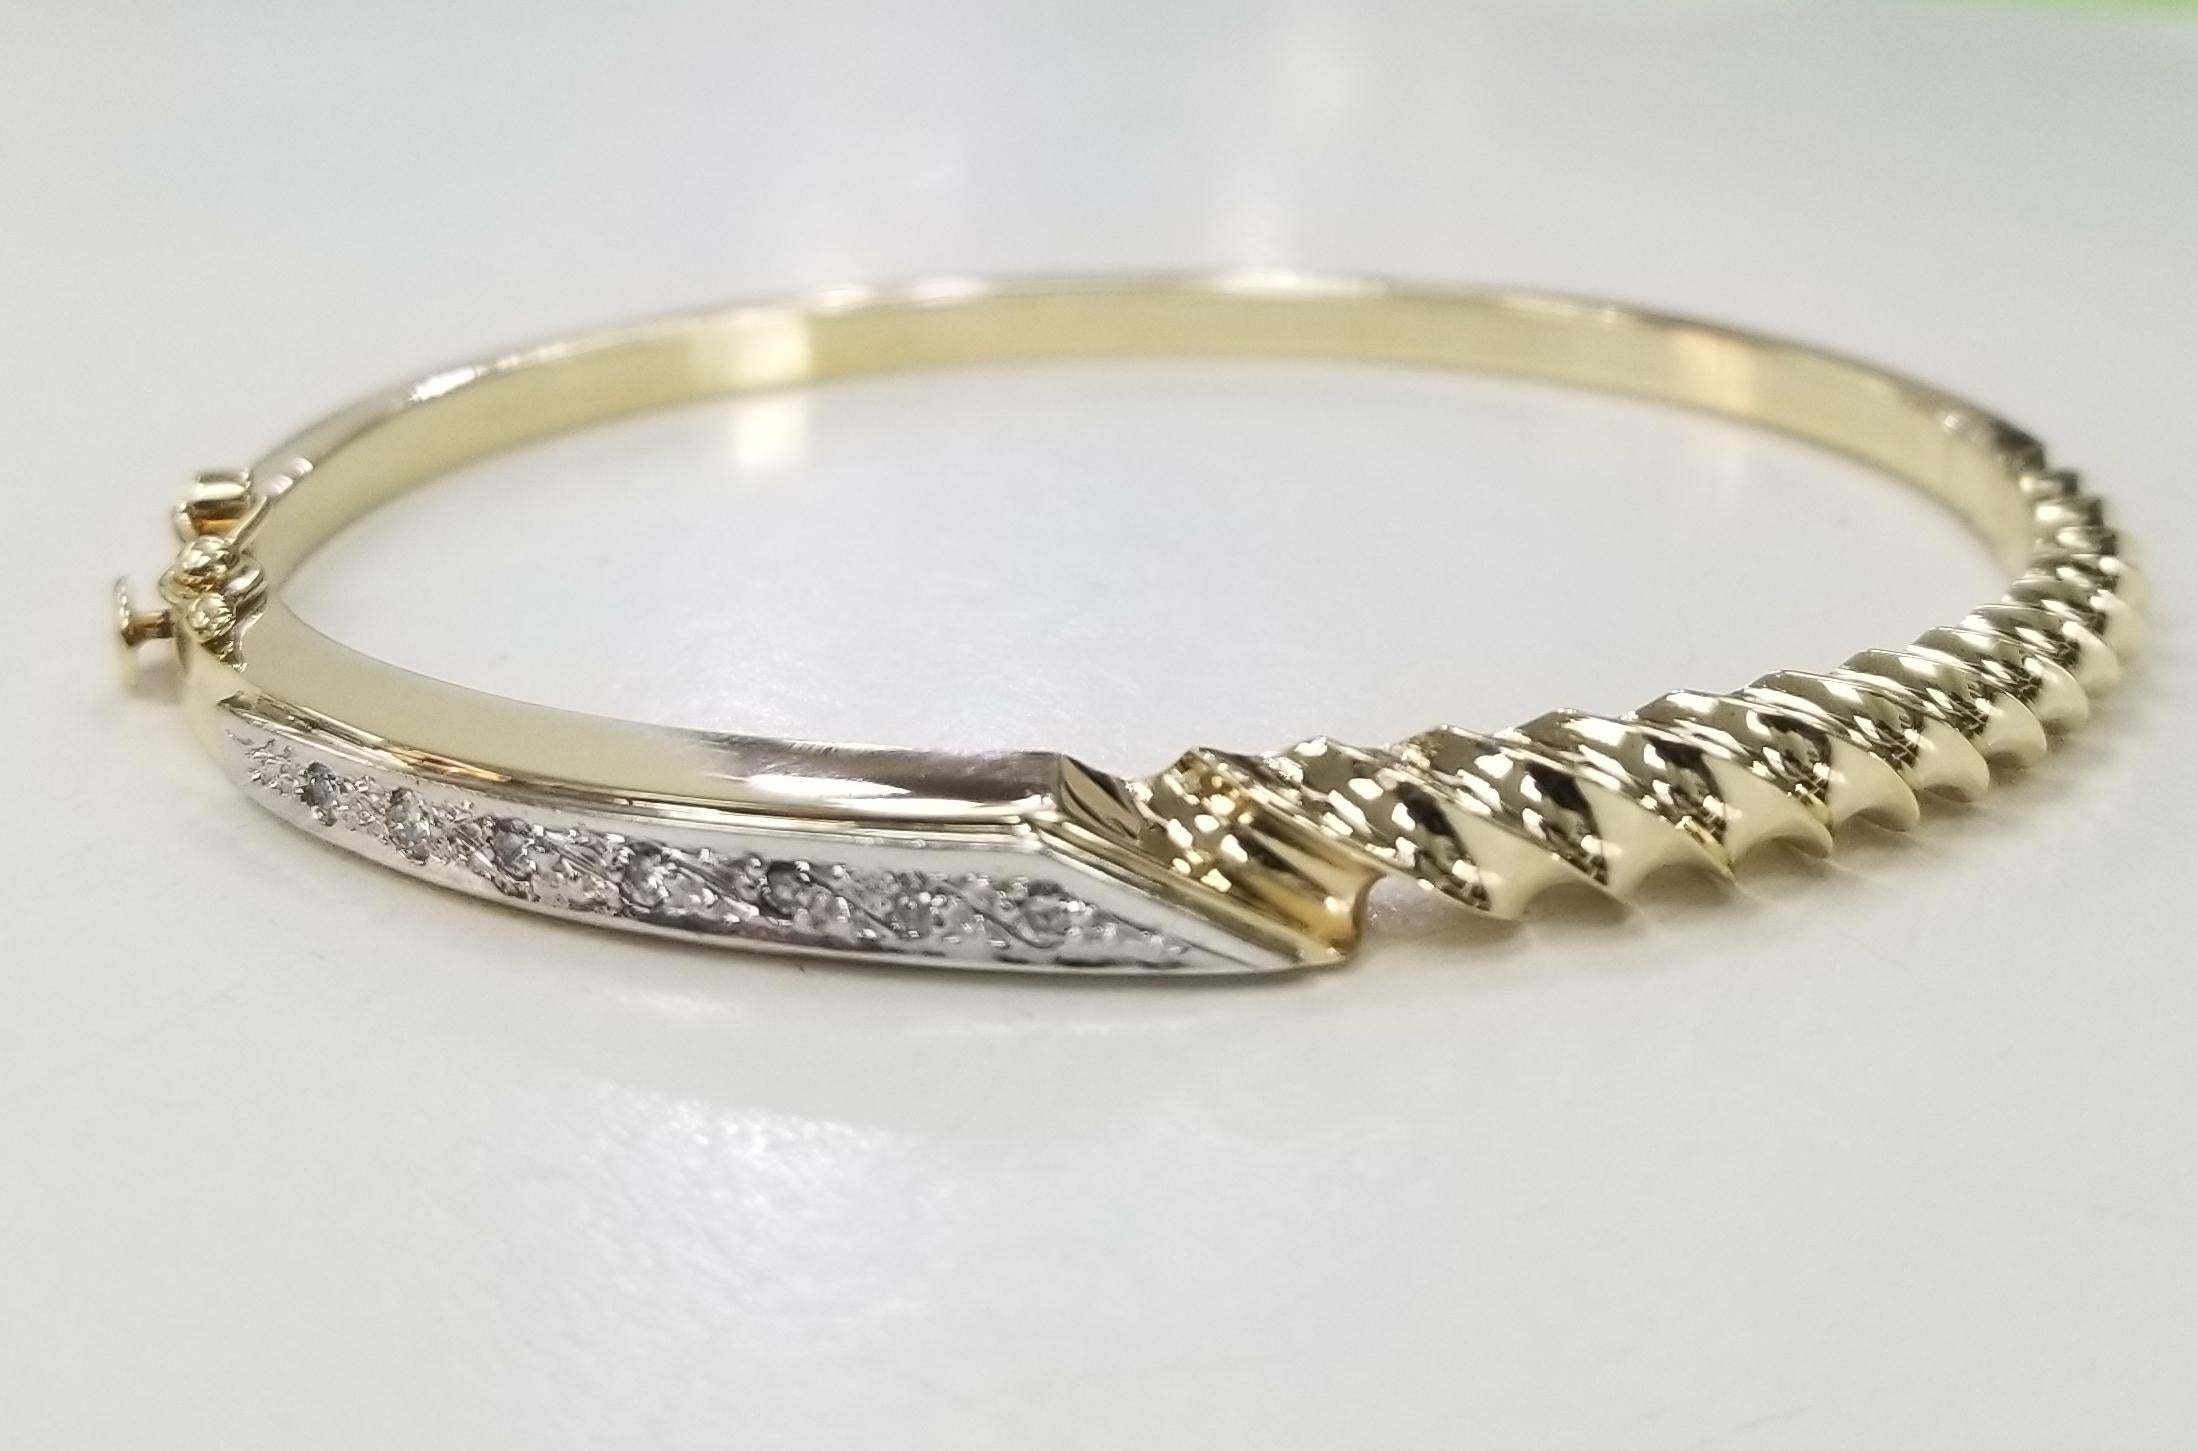 14k yellow gold diamond bangle with scallop design, containing 7 round full cut diamonds of very fine quality weighing .15pts.  Bracelet has plunger and safety. 